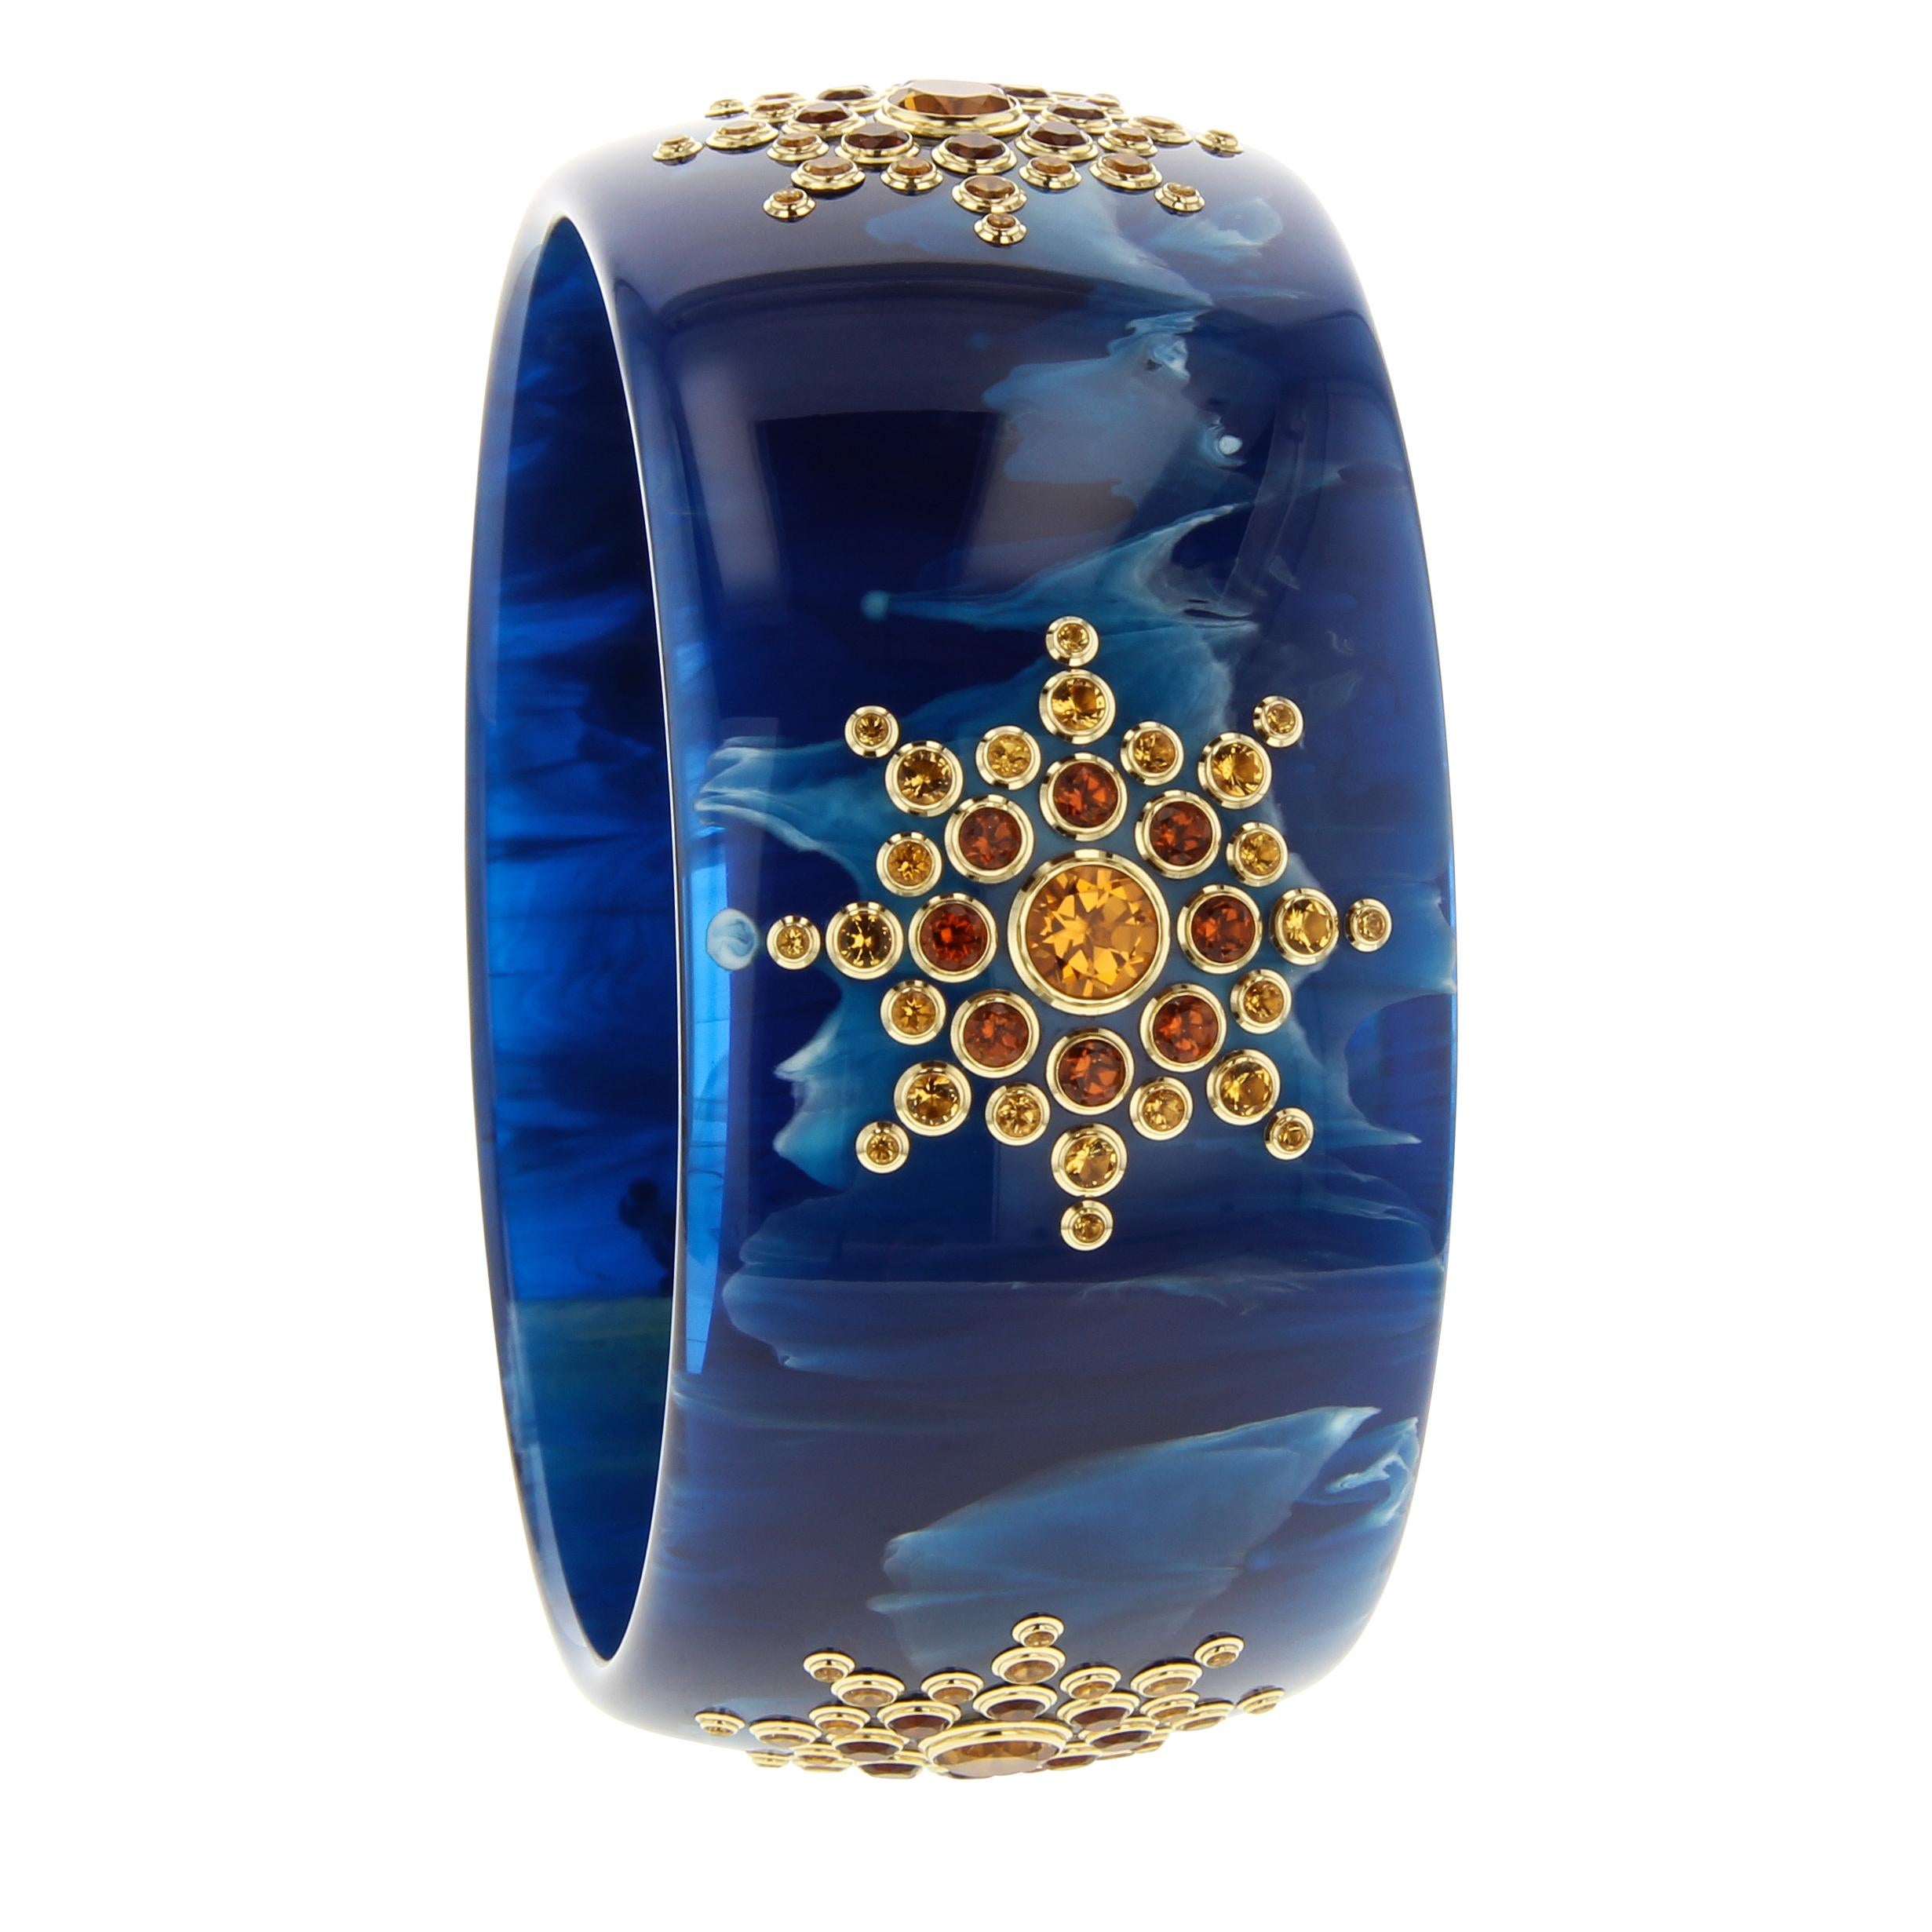 This gorgeously marbled blue vintage bakelite bangle has been set with five starbursts comprised of fine citrine in various shades. Although the shades of the citrine vary, they are perfectly matched in color and location at every station. In